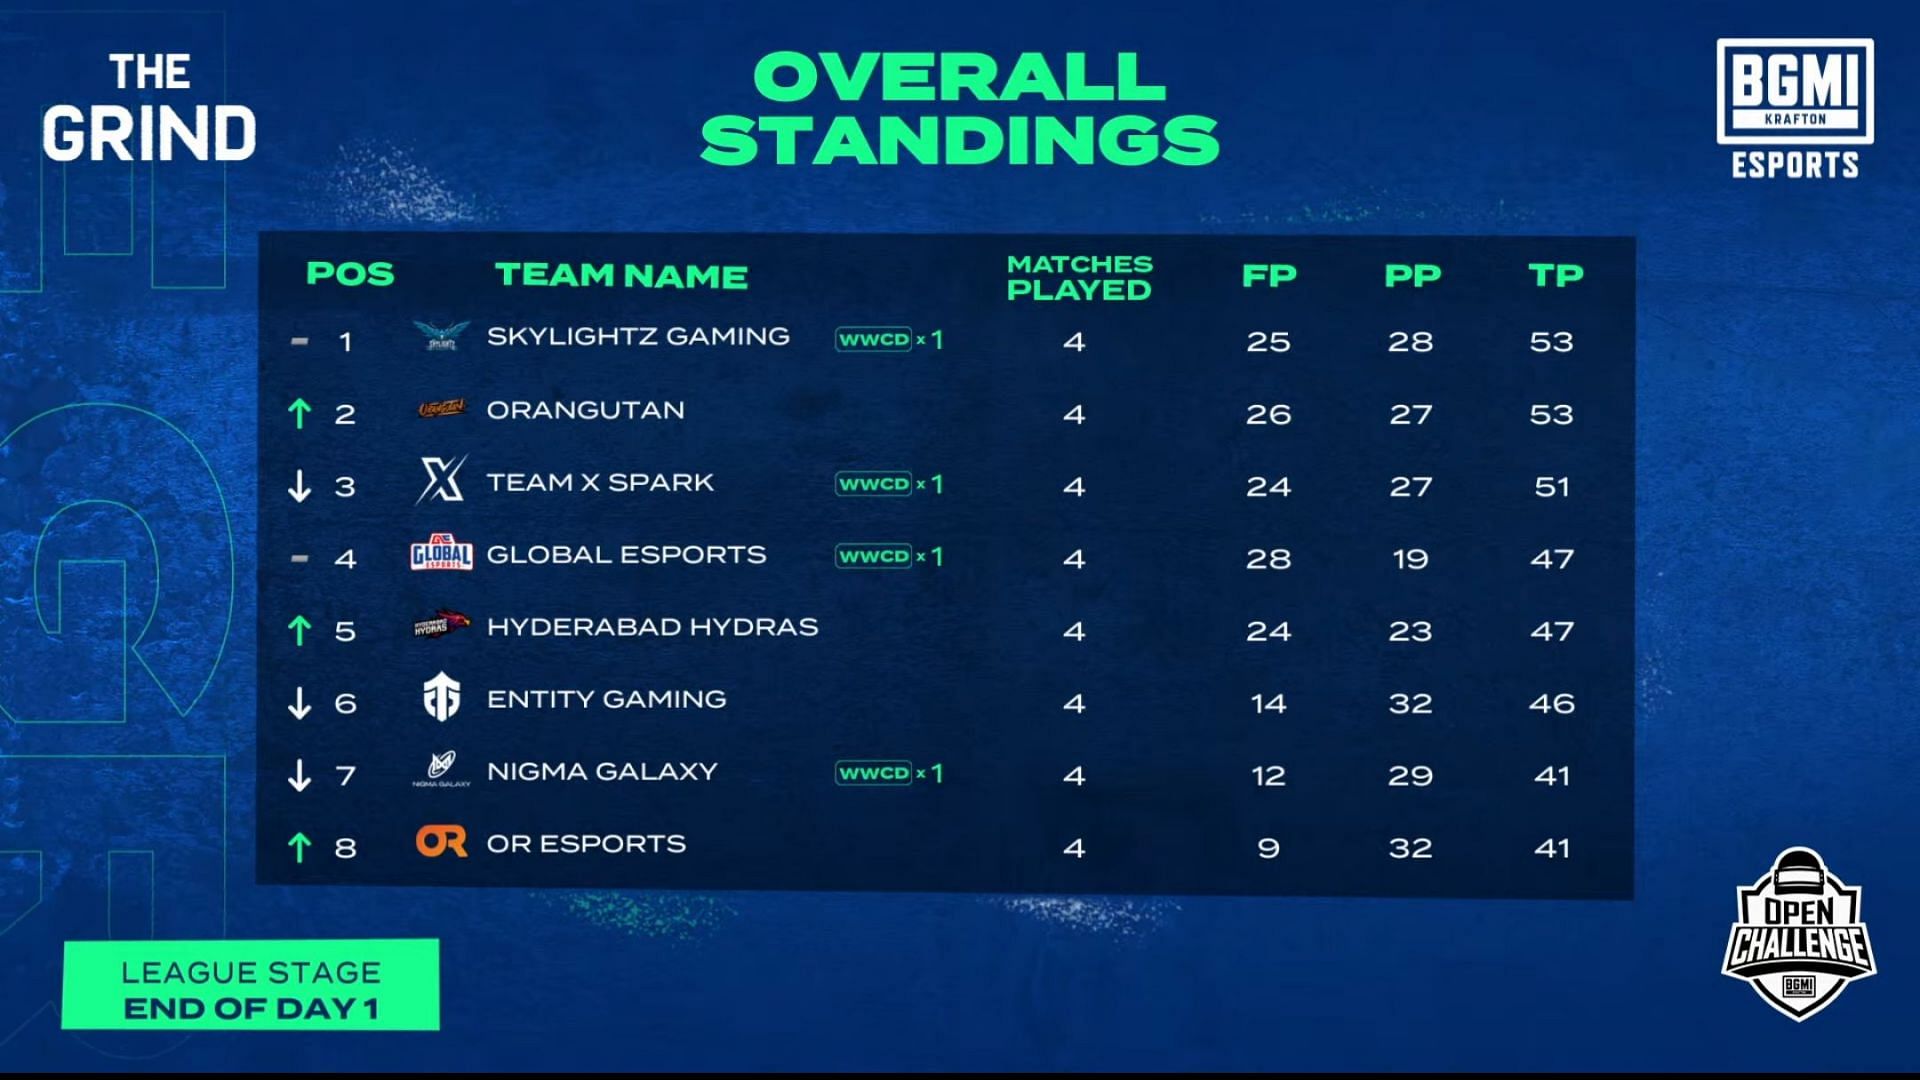 Skylightz Gaming leads the overall standings after BMOC the Grind League Stage Day 1 (Image via BGMI)